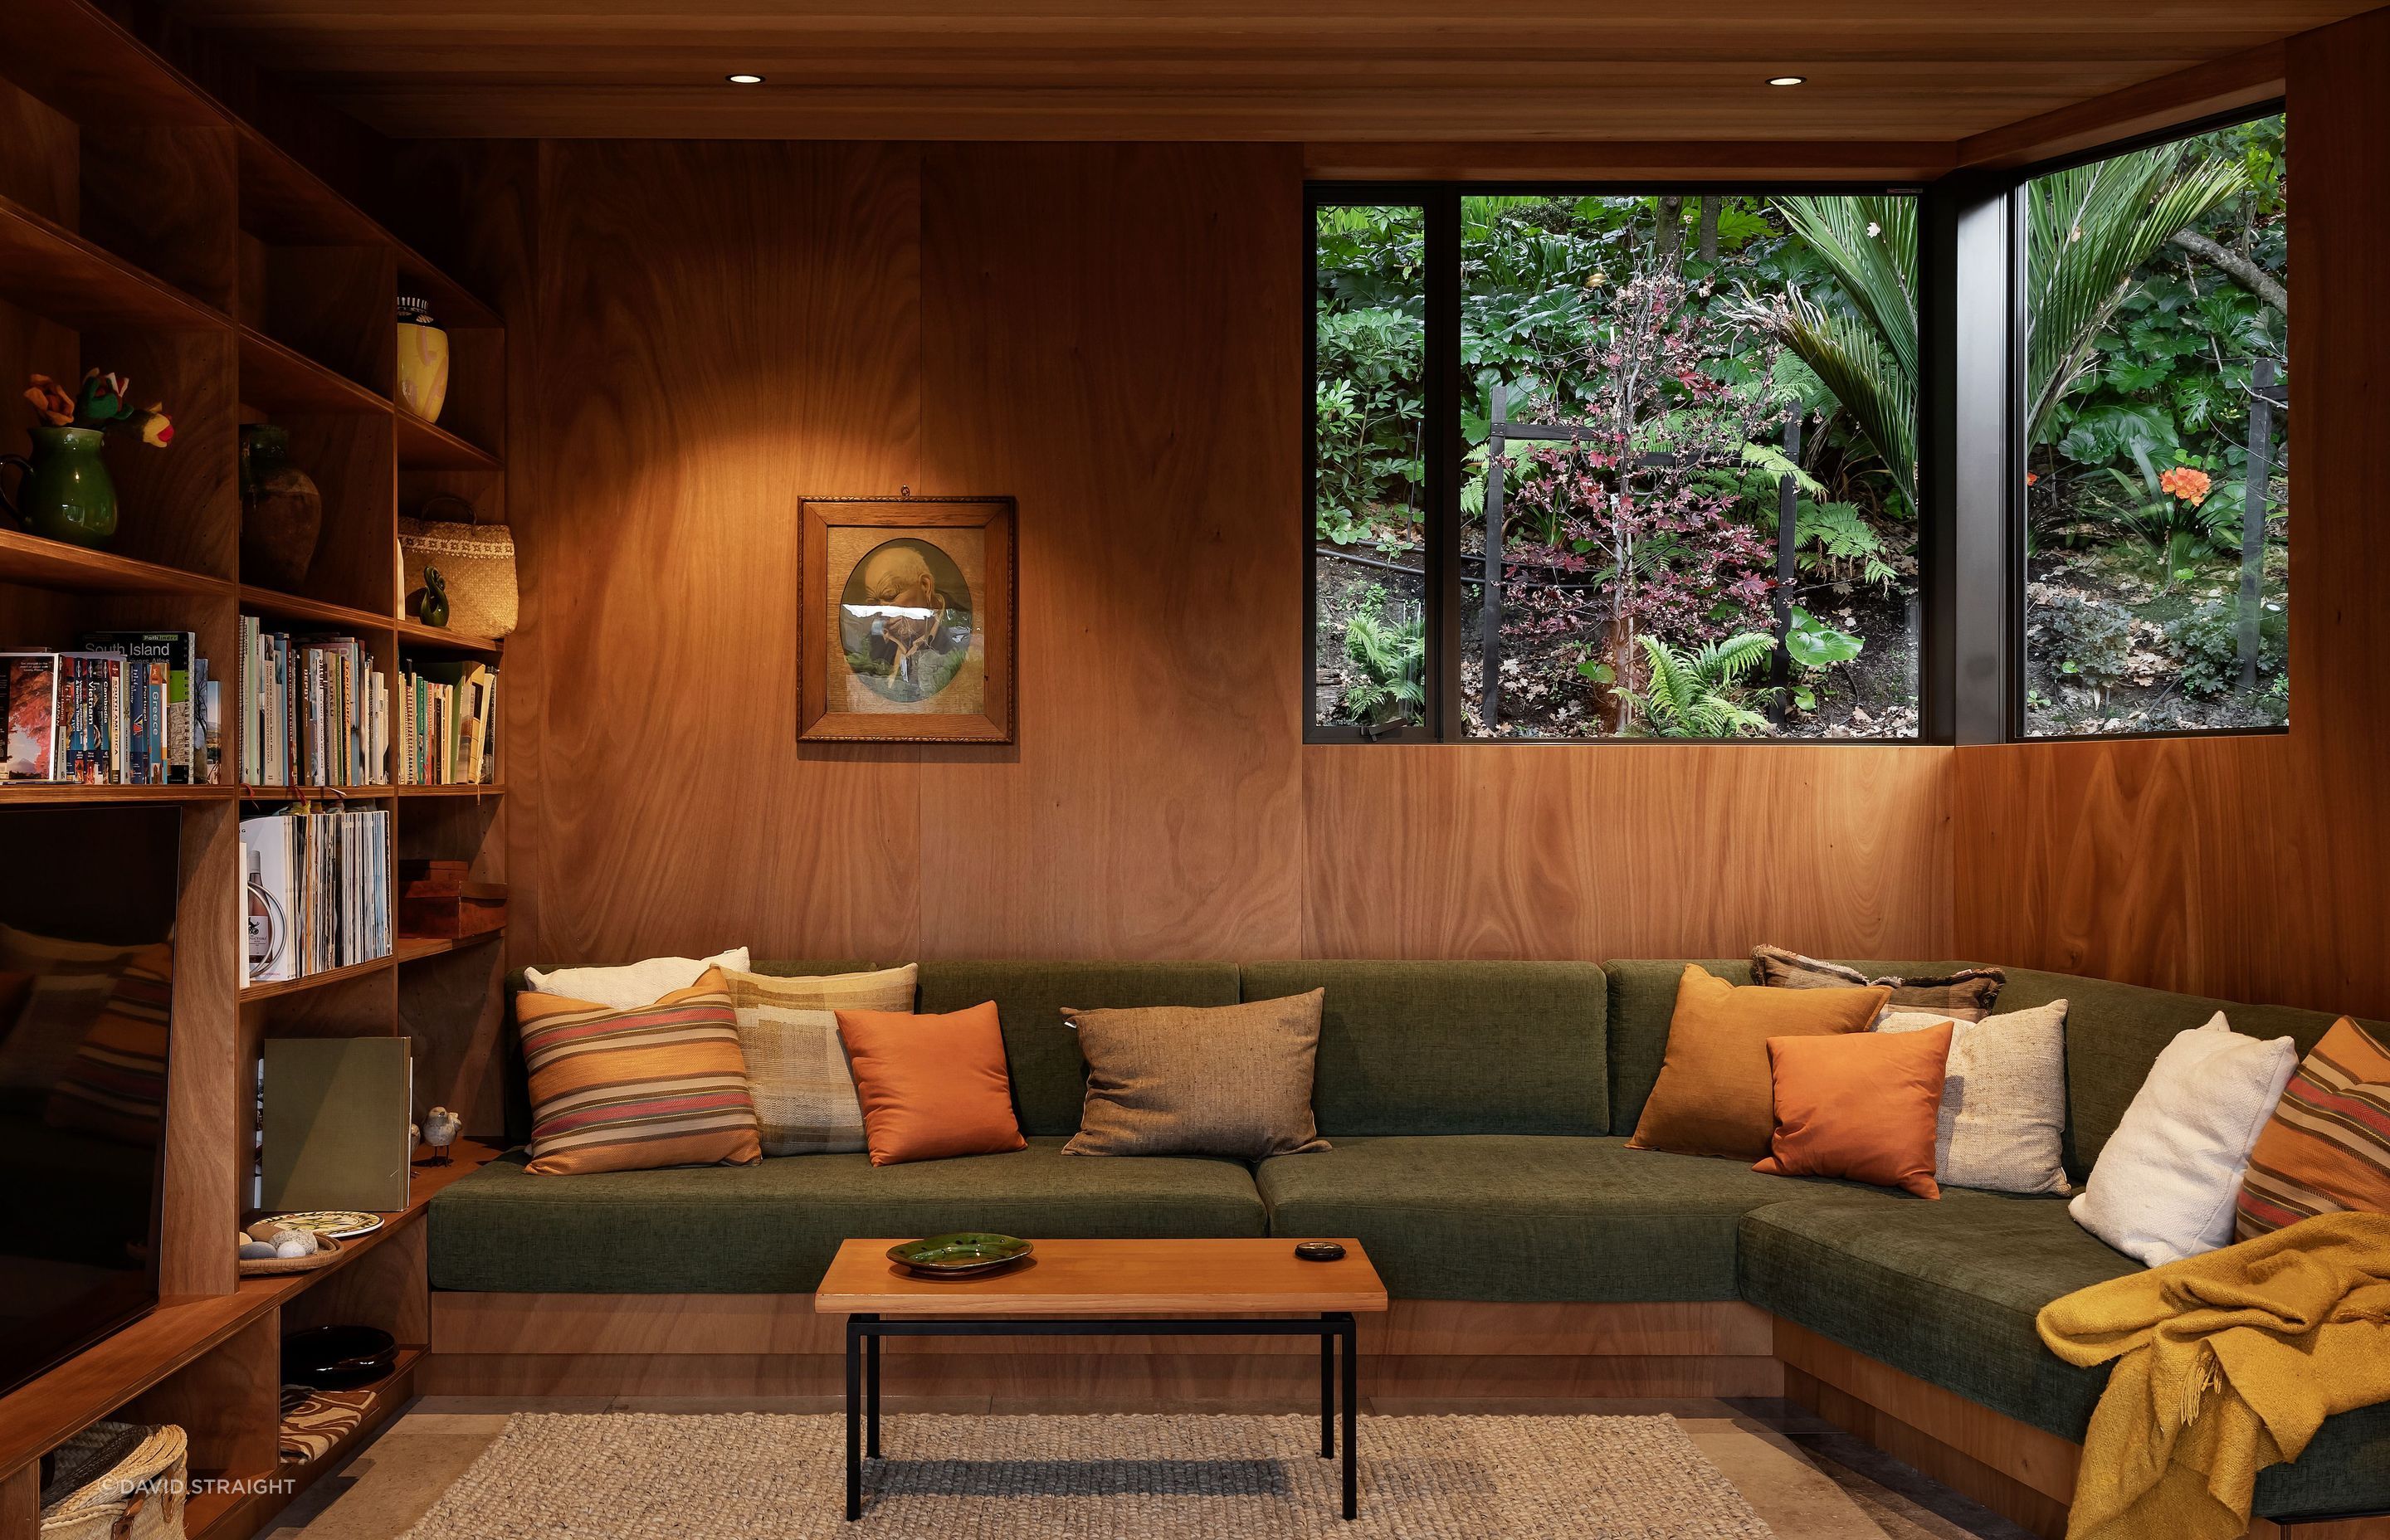 The den is a flexi-space for TV, reading or extra room for grandchildren’s sleepovers. The built-in bench seating and book shelving was designed by Hamish Cameron Architecture and crafted by Optimum Furniture.